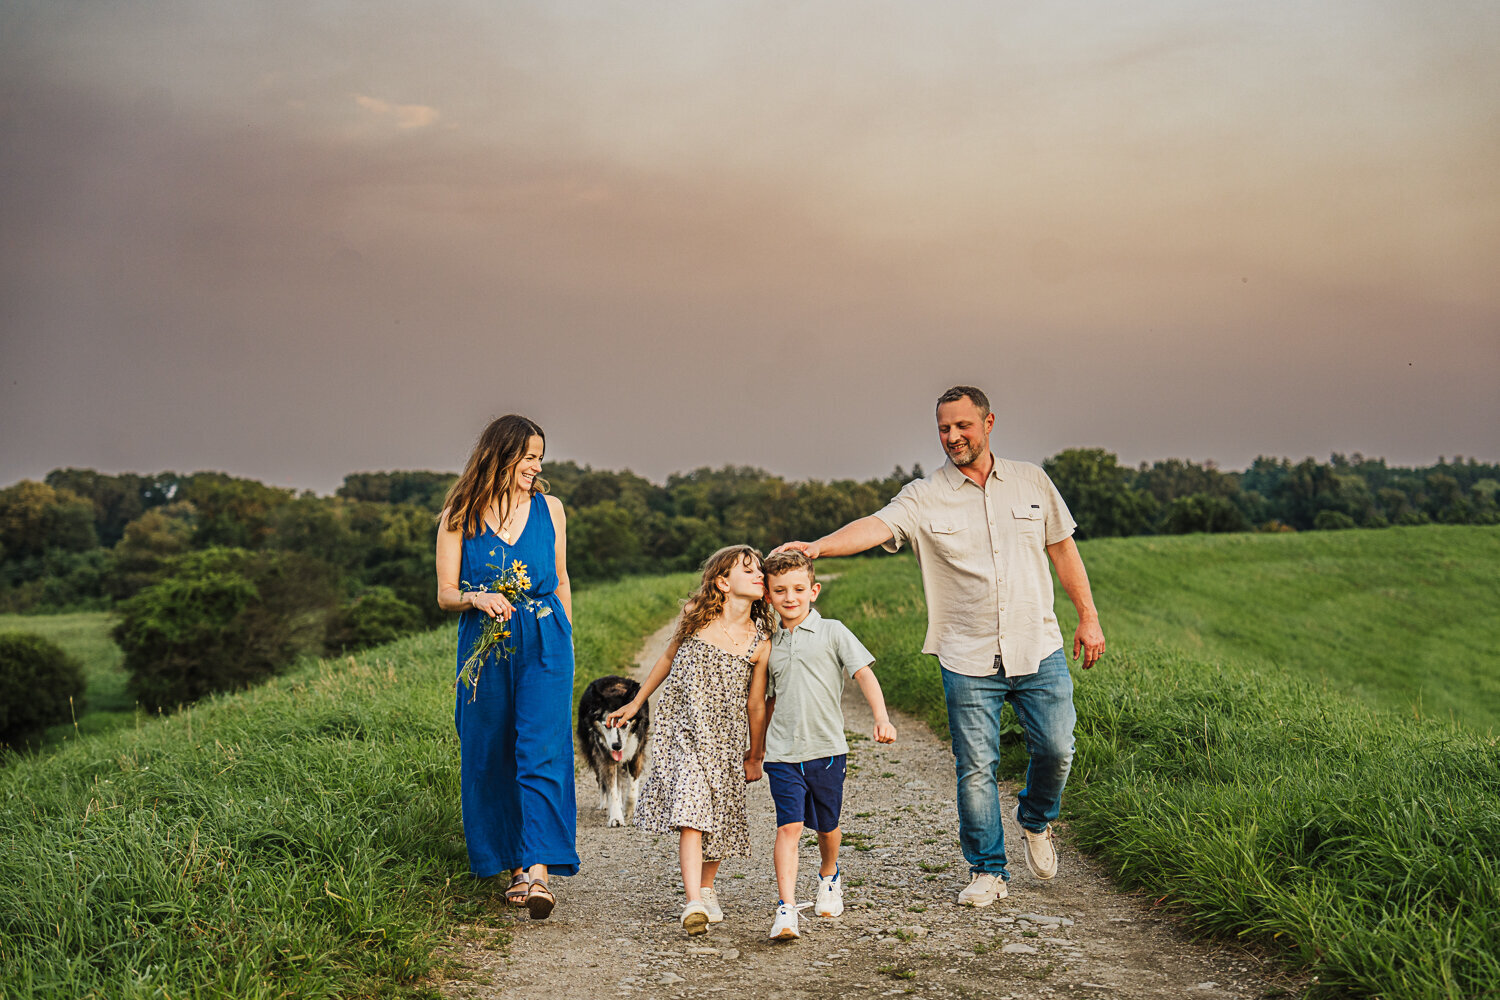 family with elementary aged kids and elderly dog walk together on a path through a field at sunset